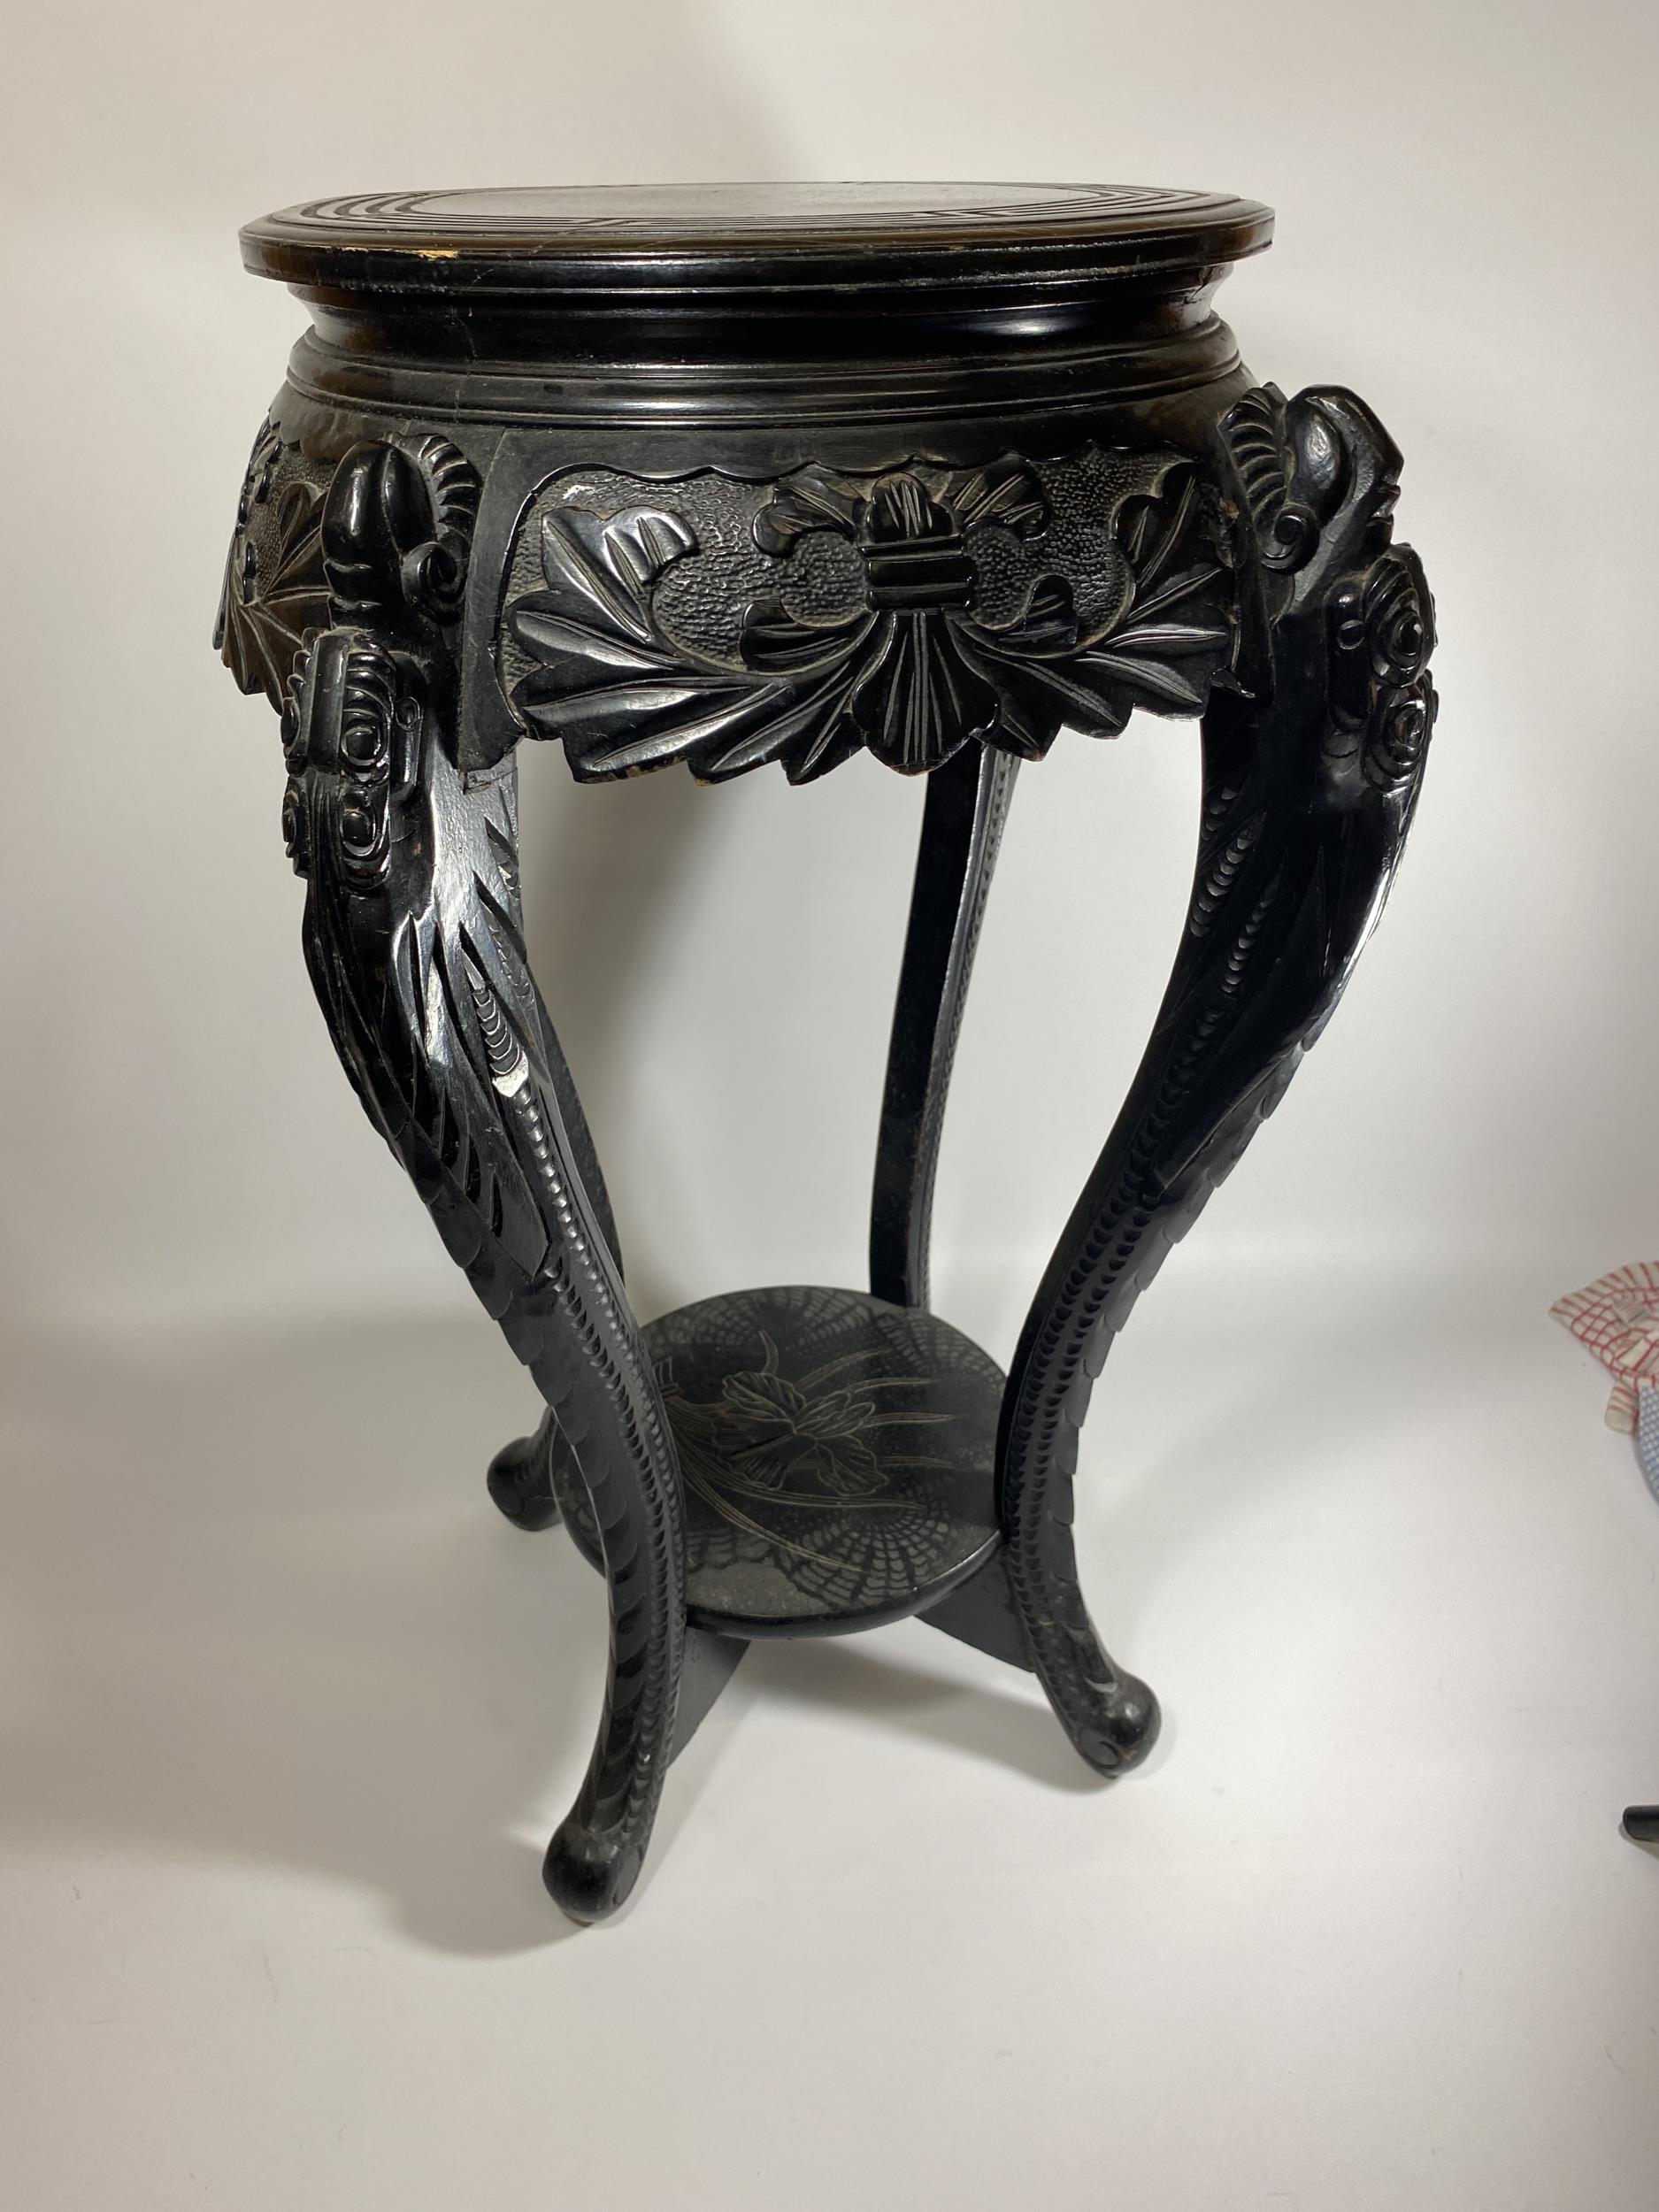 A LATE 19TH / EARLY 20TH CENTURY CHINESE HARDWOOD JARDINIERE STAND WITH CARVED FLORAL DESIGN, HEIGHT